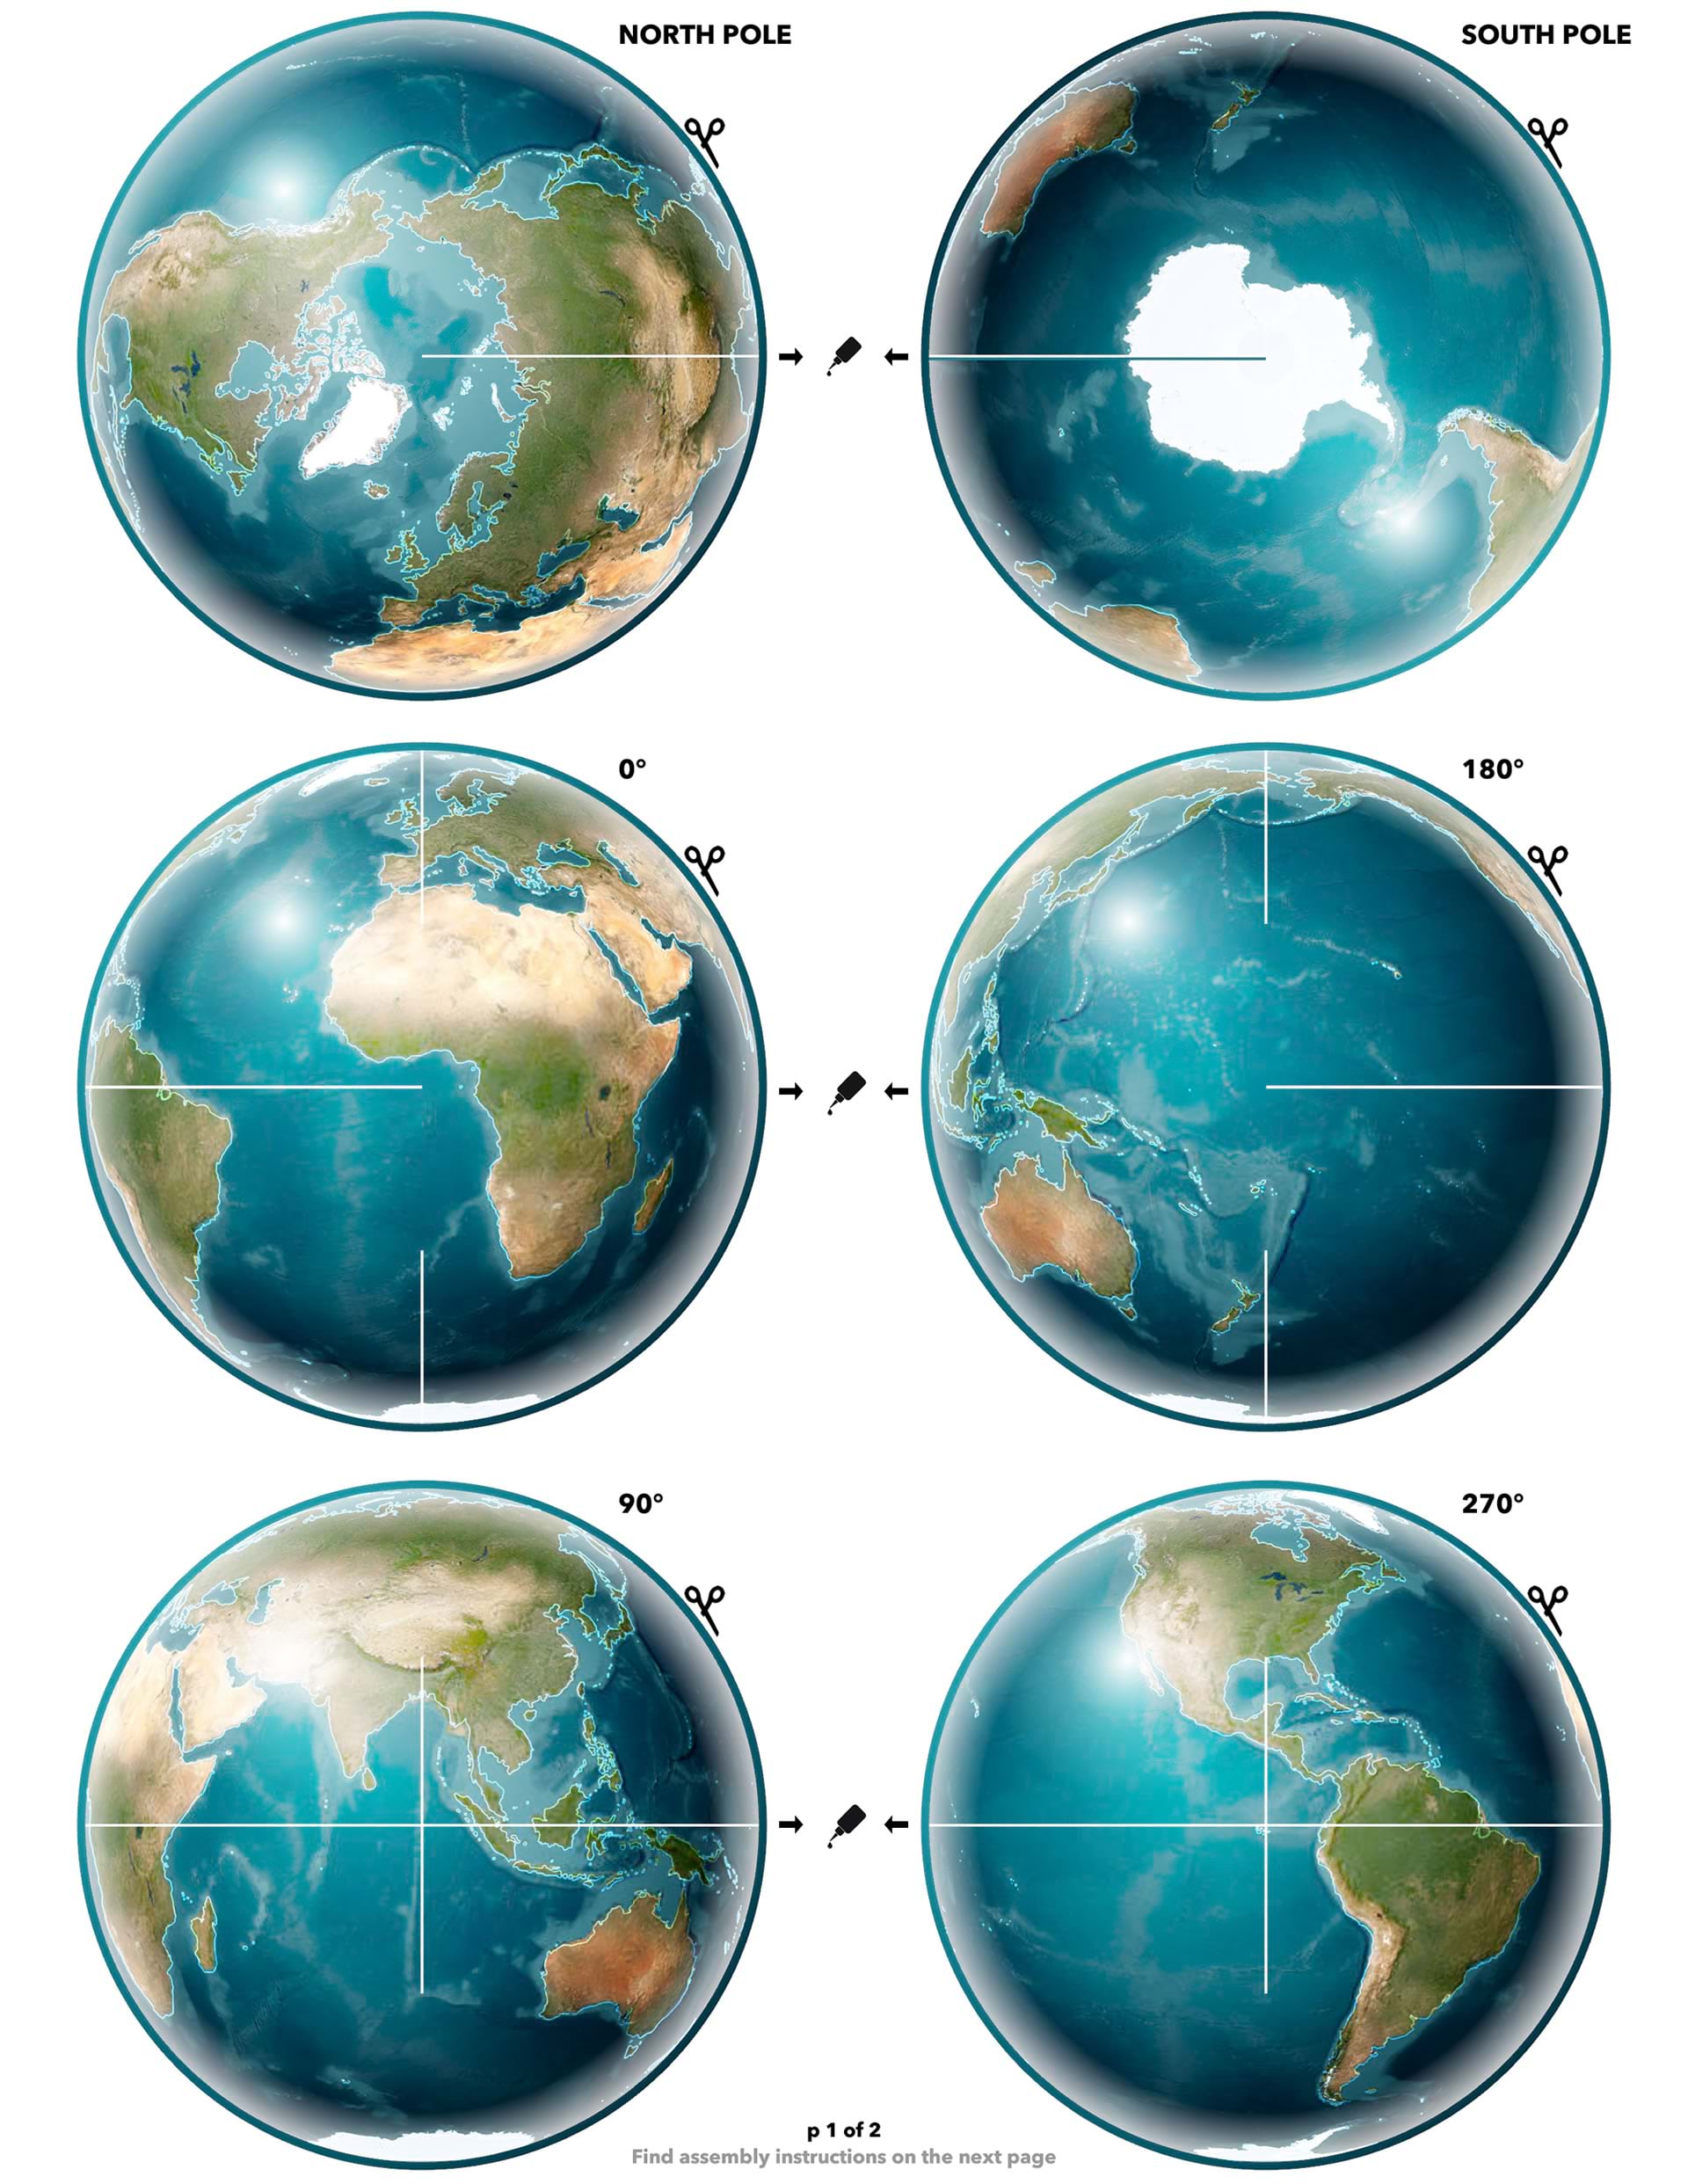 click to open a full resolution version of this globe ornament template, and print it out.